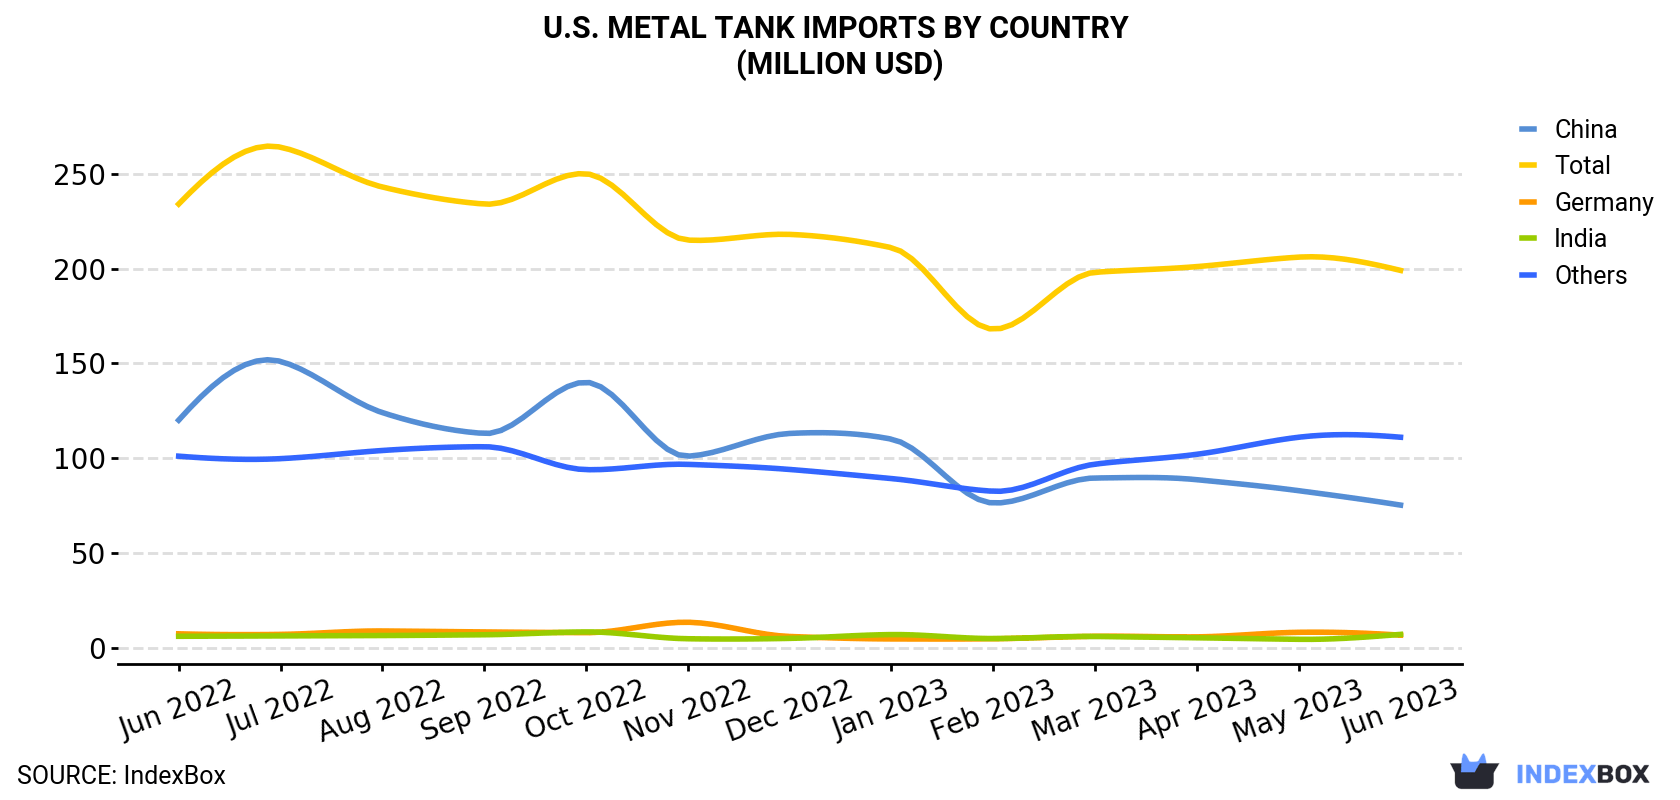 U.S. Metal Tank Imports By Country (Million USD)